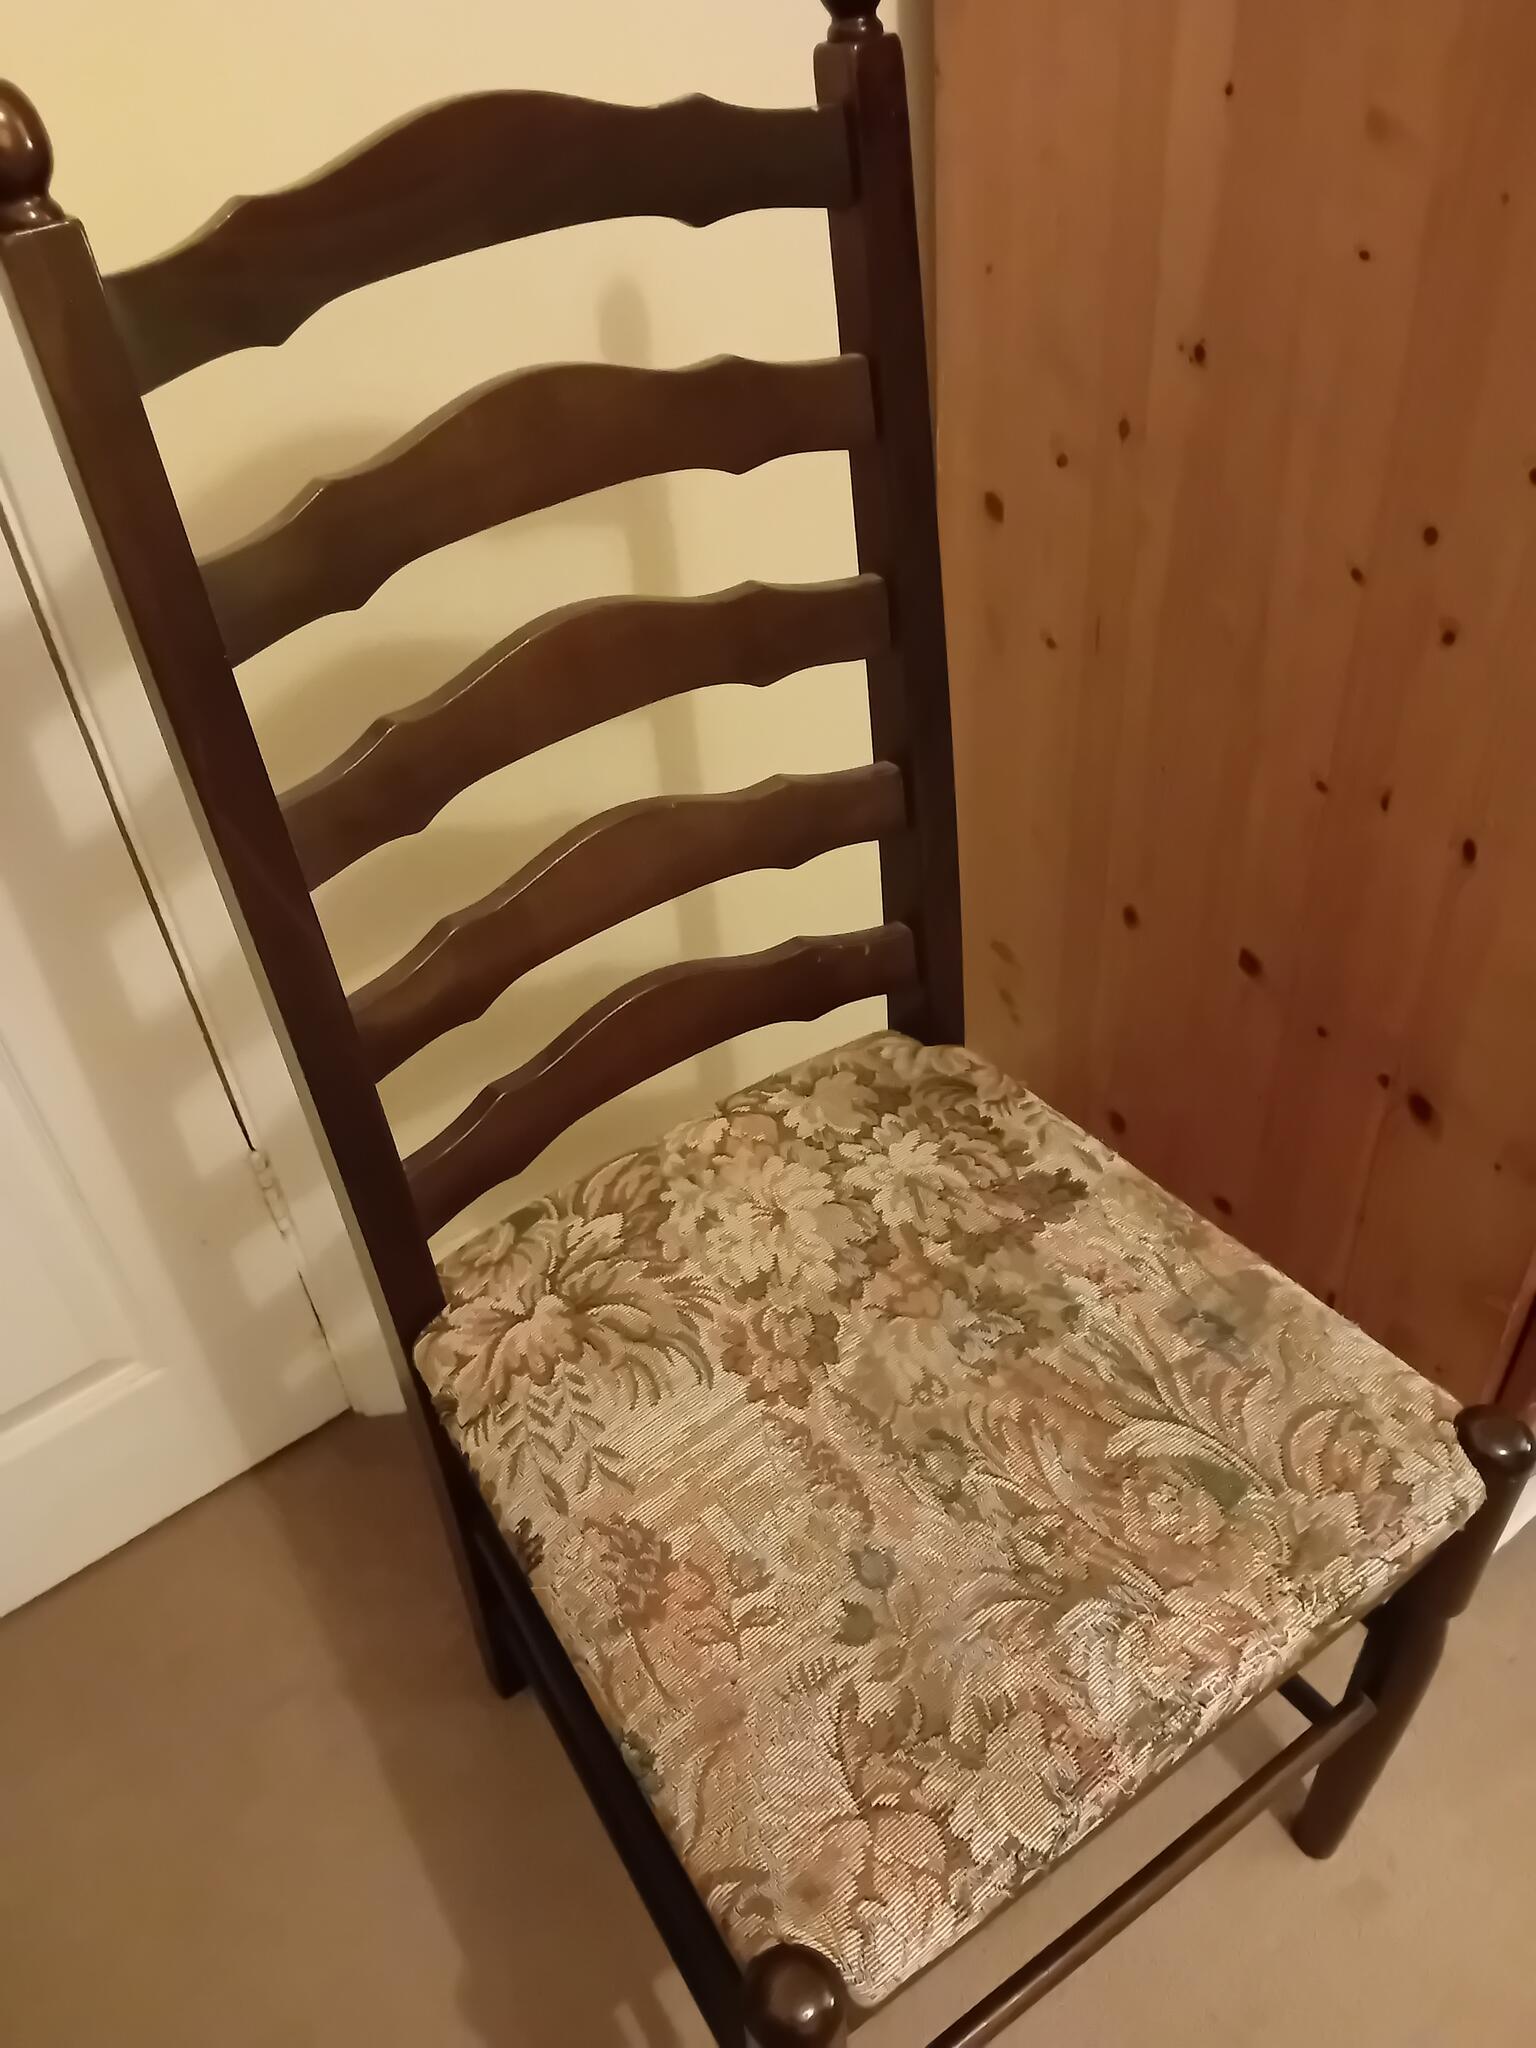 1dining Room Chair For £4 In Hereford, Engl For Sale  Free — Nextdoor